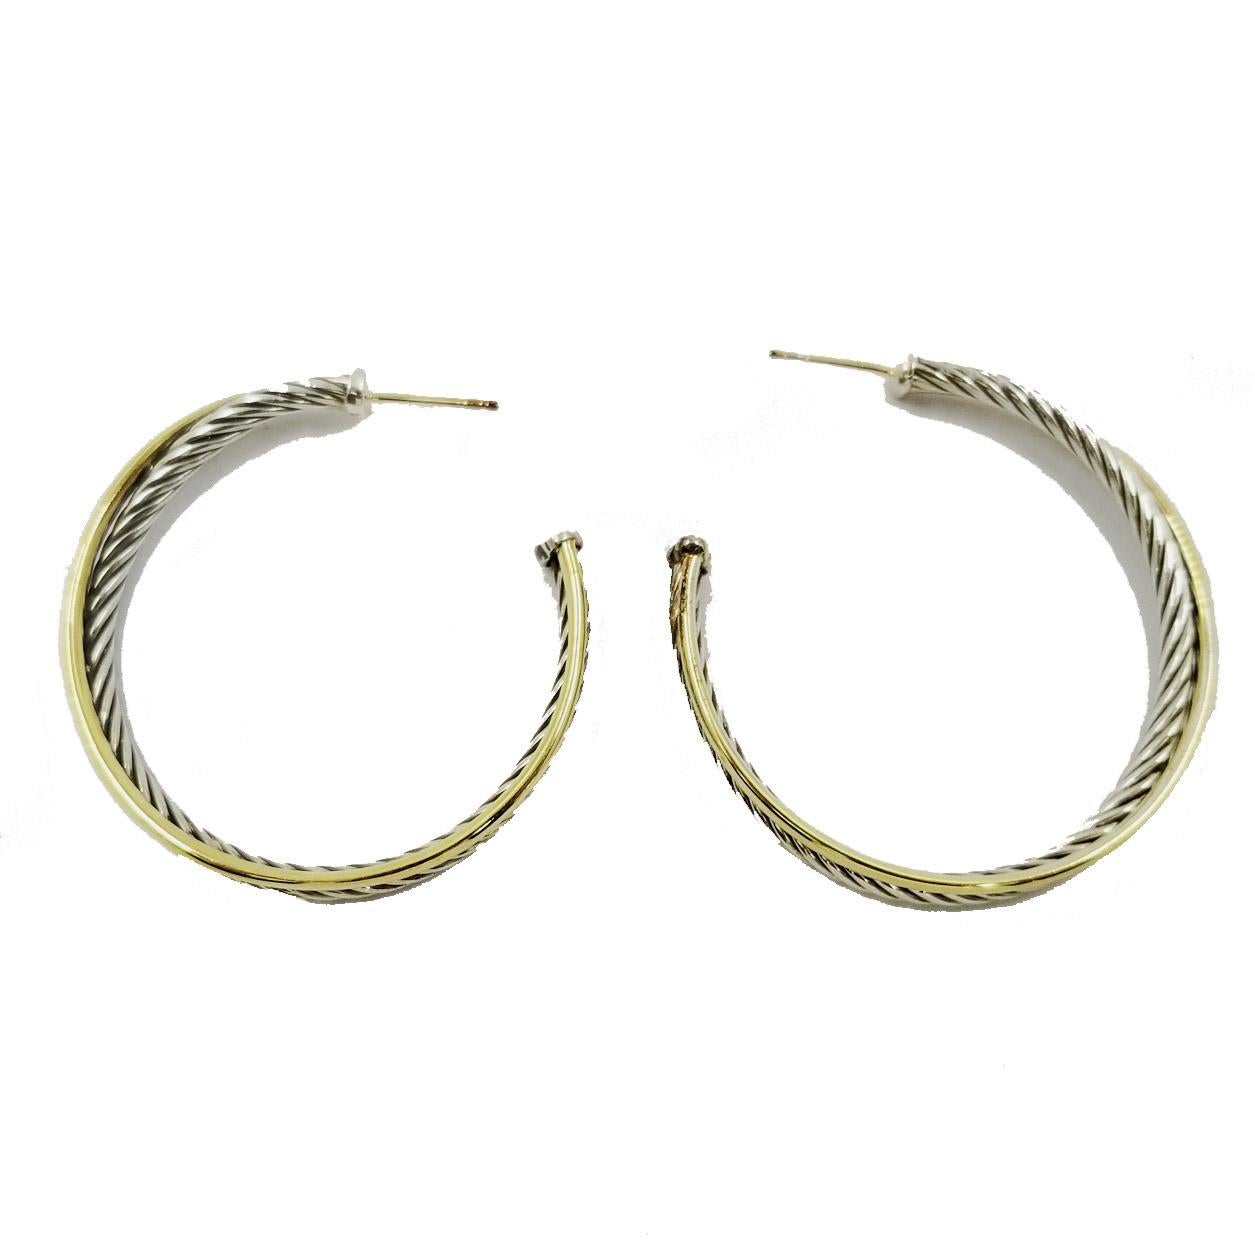 Sterling silver and 18 karat yellow gold crossover hoops by designer David Yurman. The large hoop earrings have a 44mm diameter with gold post and large sterling silver friction back. $975 original MSRP. Comes with new David Yurman polishing cloth.